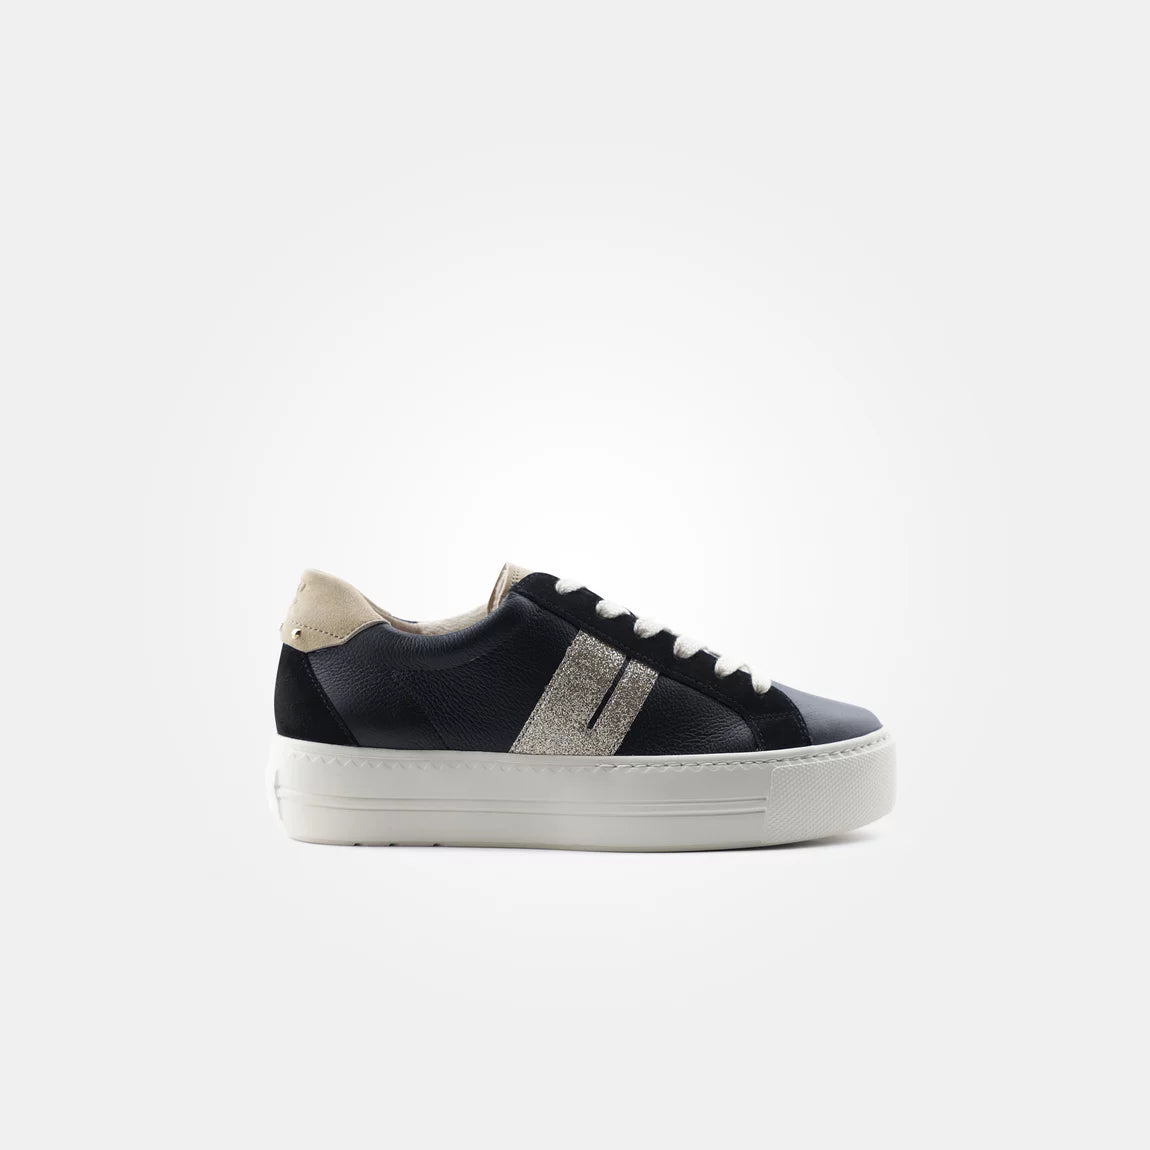 Paul Green - 5330 Black and Gold Trainer